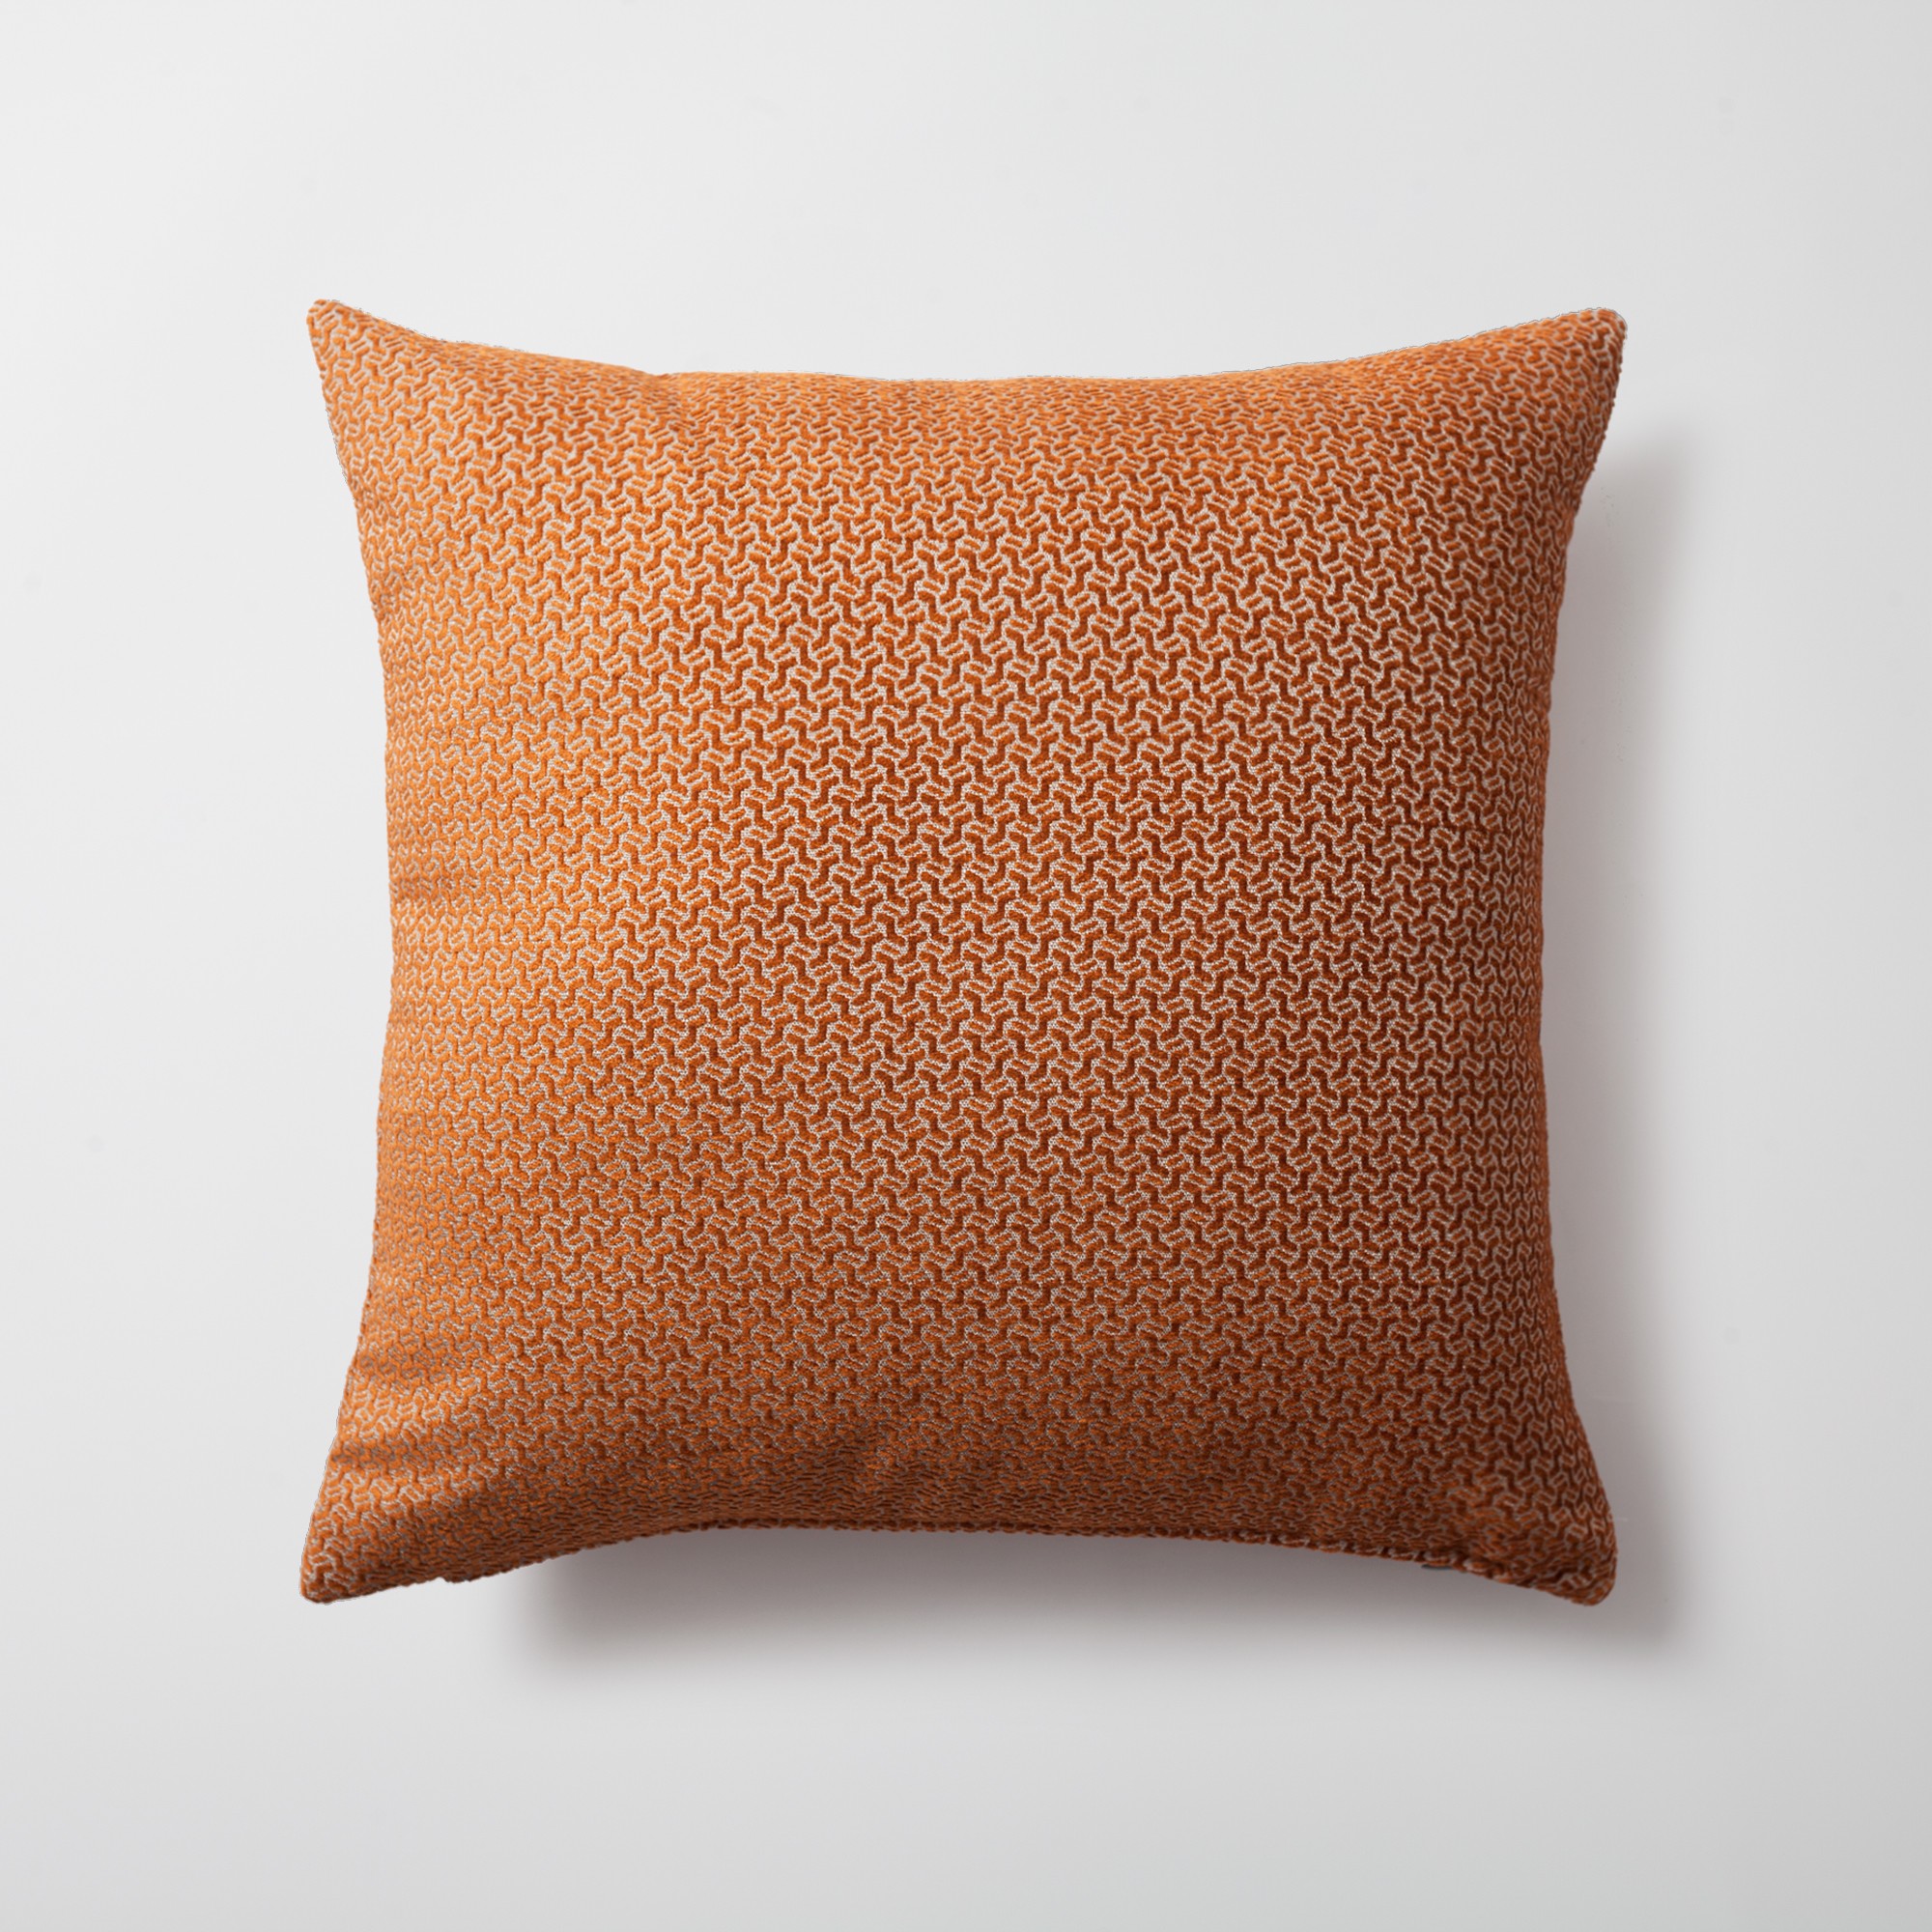 "Arte" - Geometric Patterned 20x20 Inch Cushion - Orange (Cover Only)